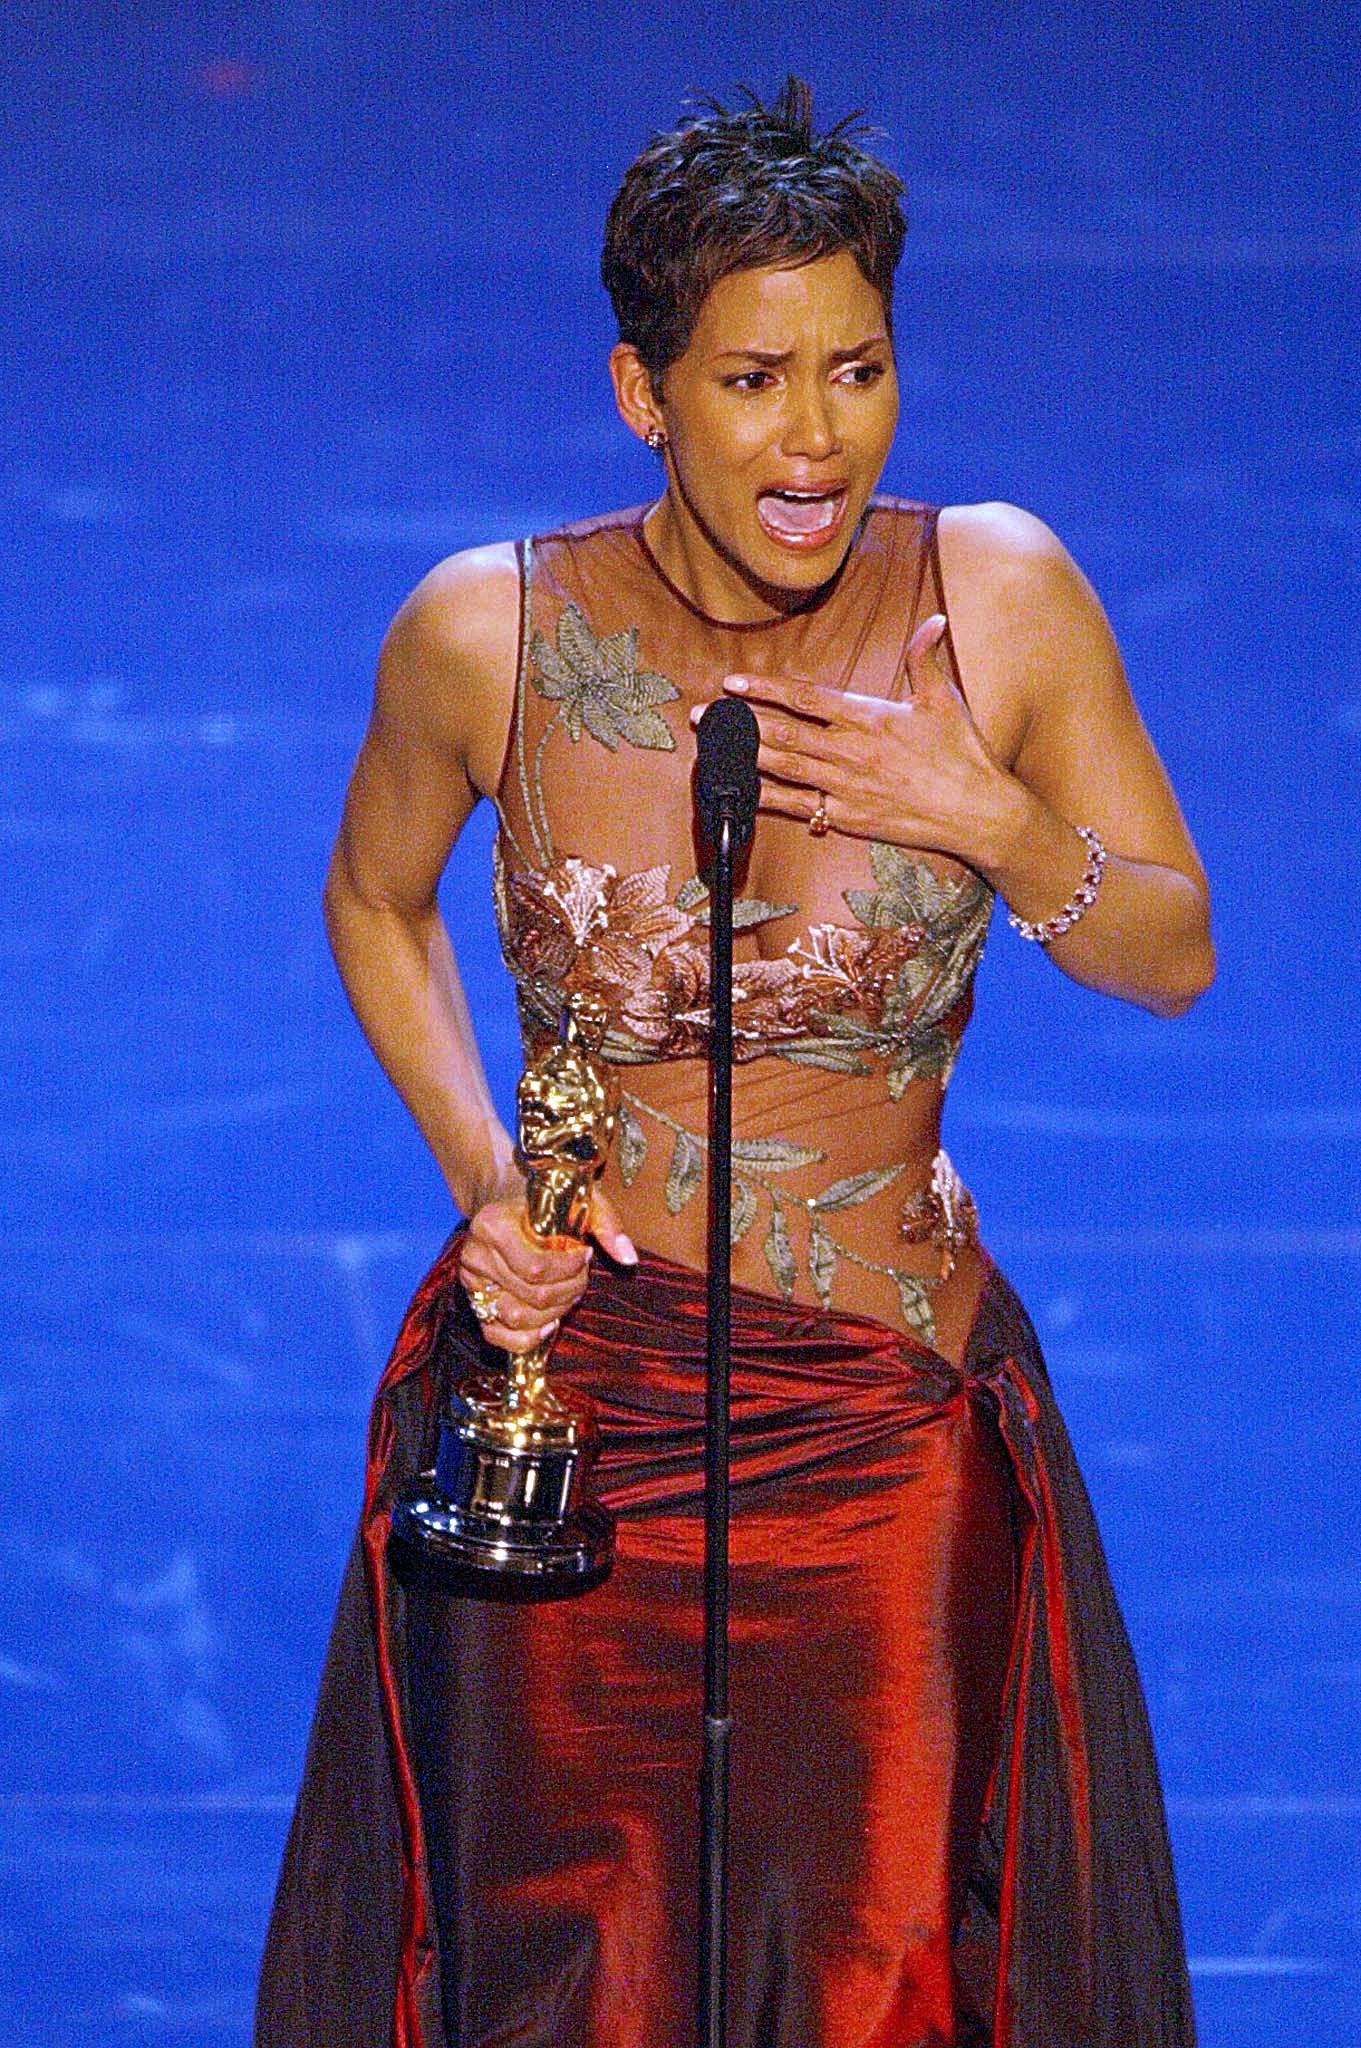 <p><a href="https://www.wonderwall.com/celebrity/profiles/overview/halle-berry-289.article">Halle Berry</a> won the Oscar for best actress in 2002 for her performance in "Monster's Ball" -- she's the first and, so far, only Black woman to receive the honor. "This moment is so much bigger than me. This moment is for Dorothy Dandridge, Lena Horne, Diahann Carroll. It's for the women that stand beside me, Jada Pinkett, Angela Bassett, Vivica Fox," she said in her acceptance speech. "And it's for every nameless, faceless woman of color that now has a chance because this door tonight has been opened." </p>